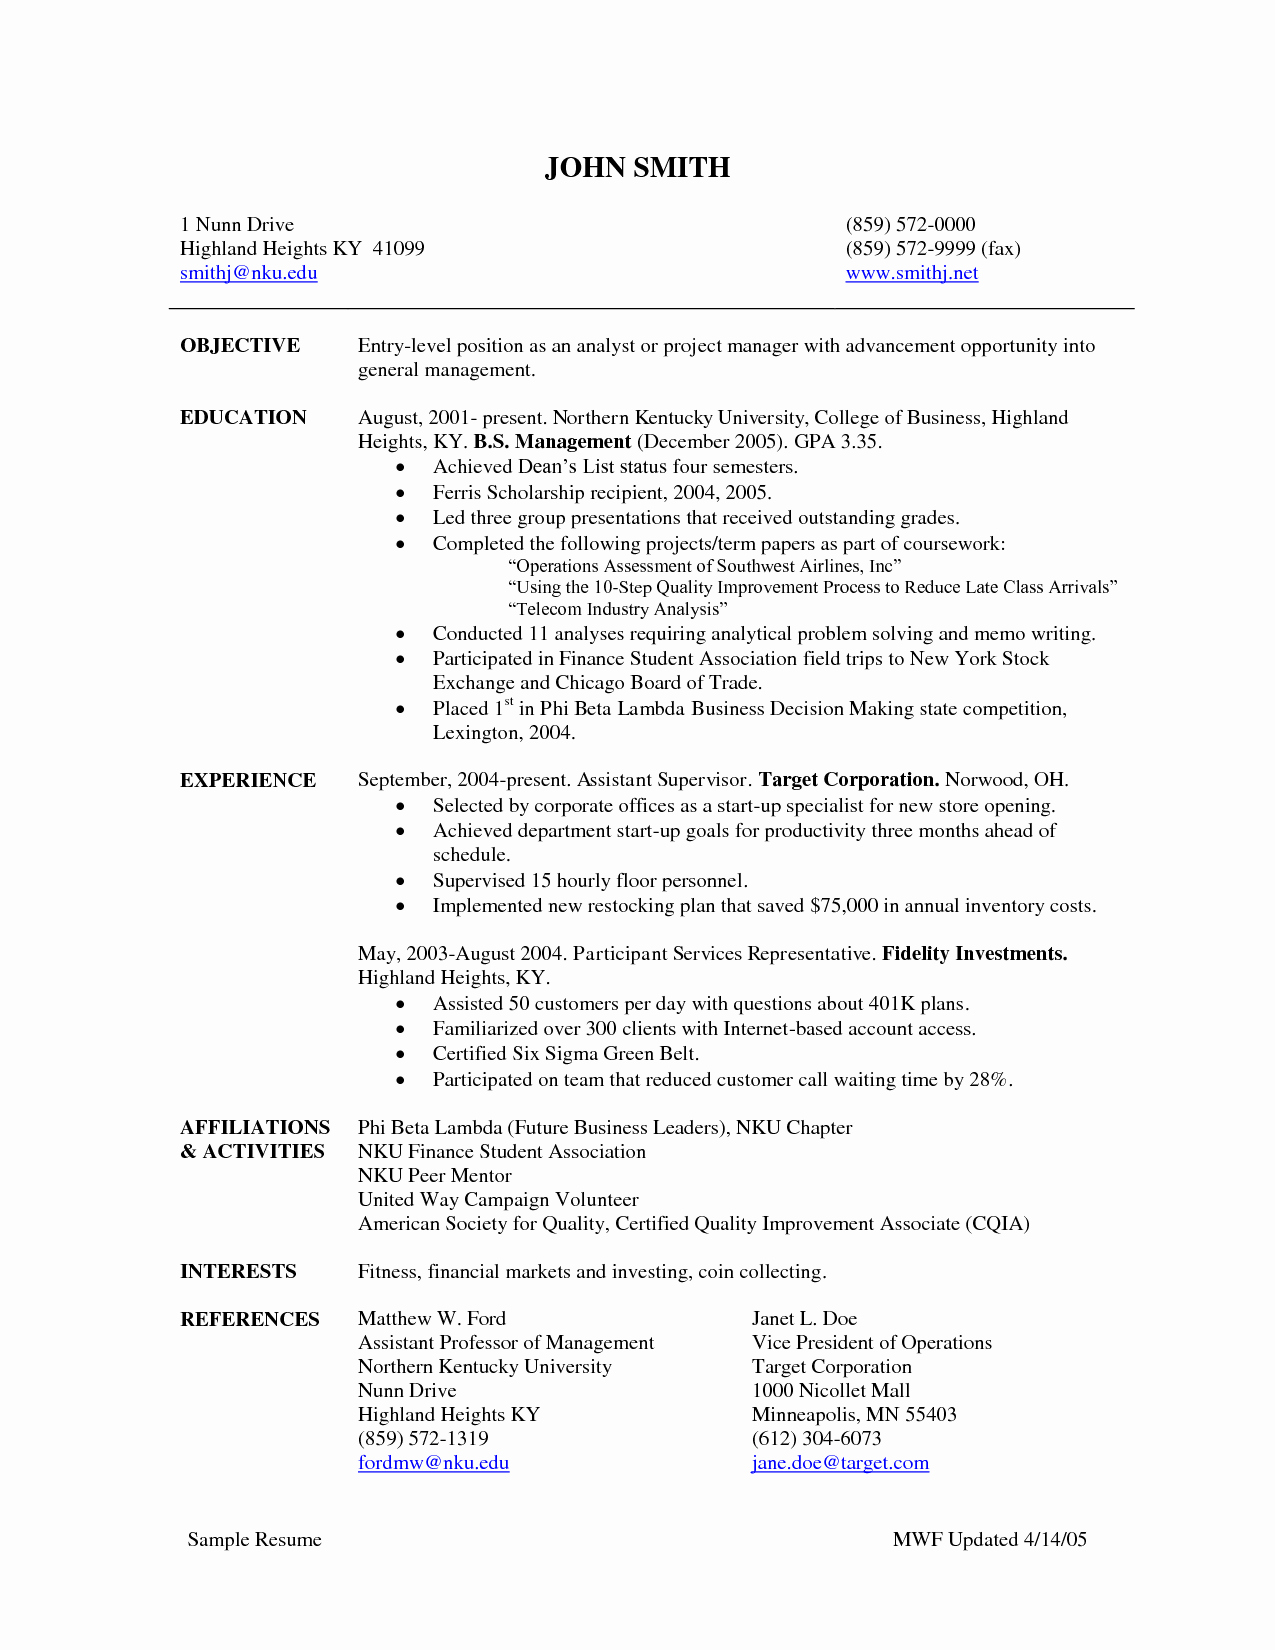 Entry Level Project Manager Resume